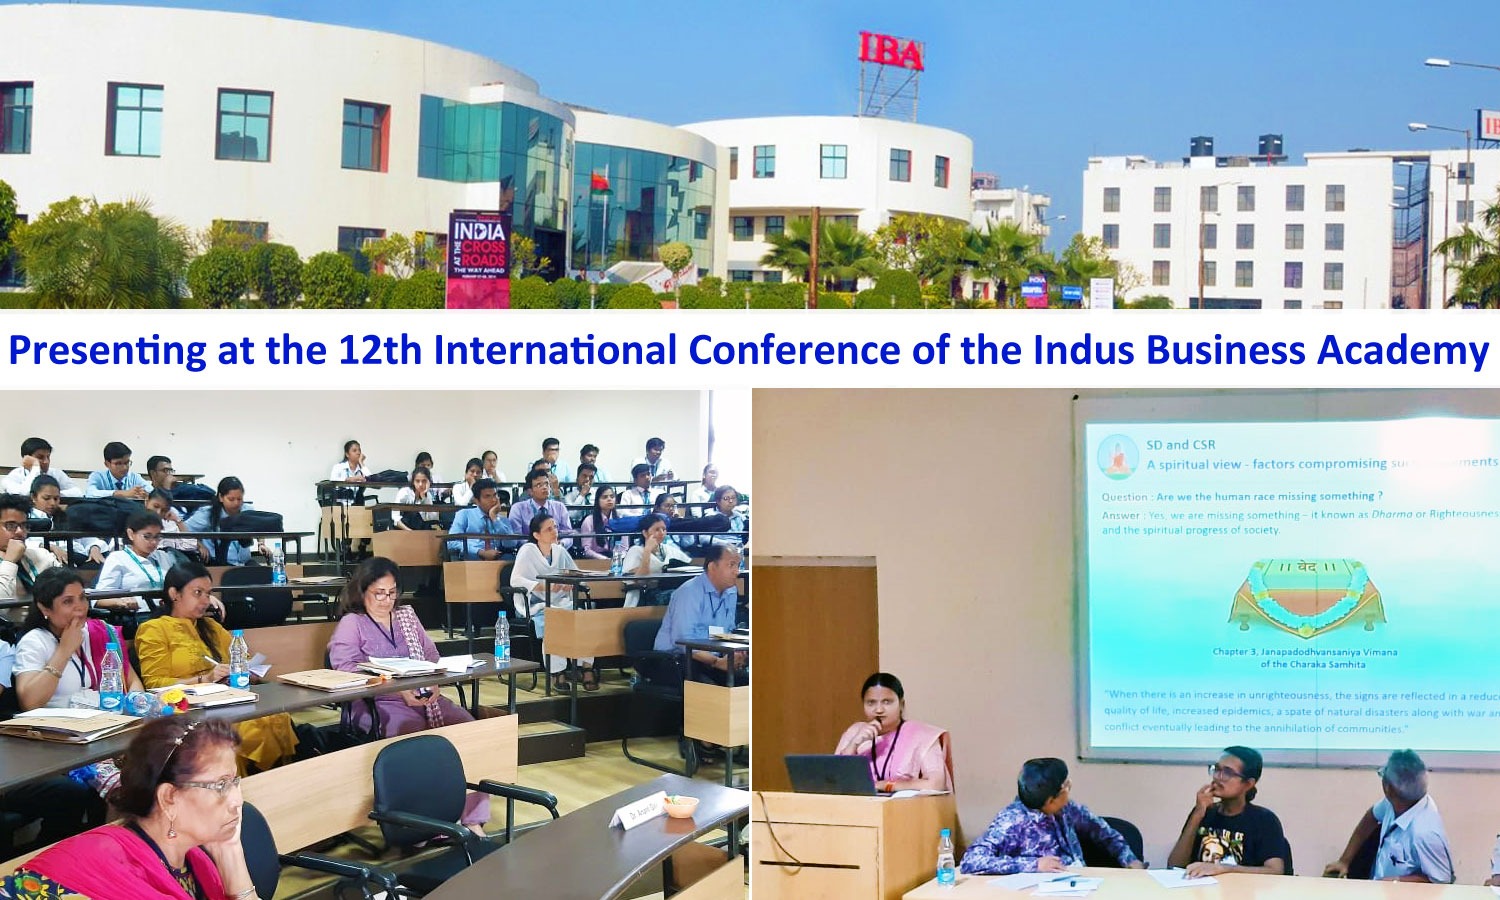 Presenting at the 12th International Conference of the Indus Business Academy